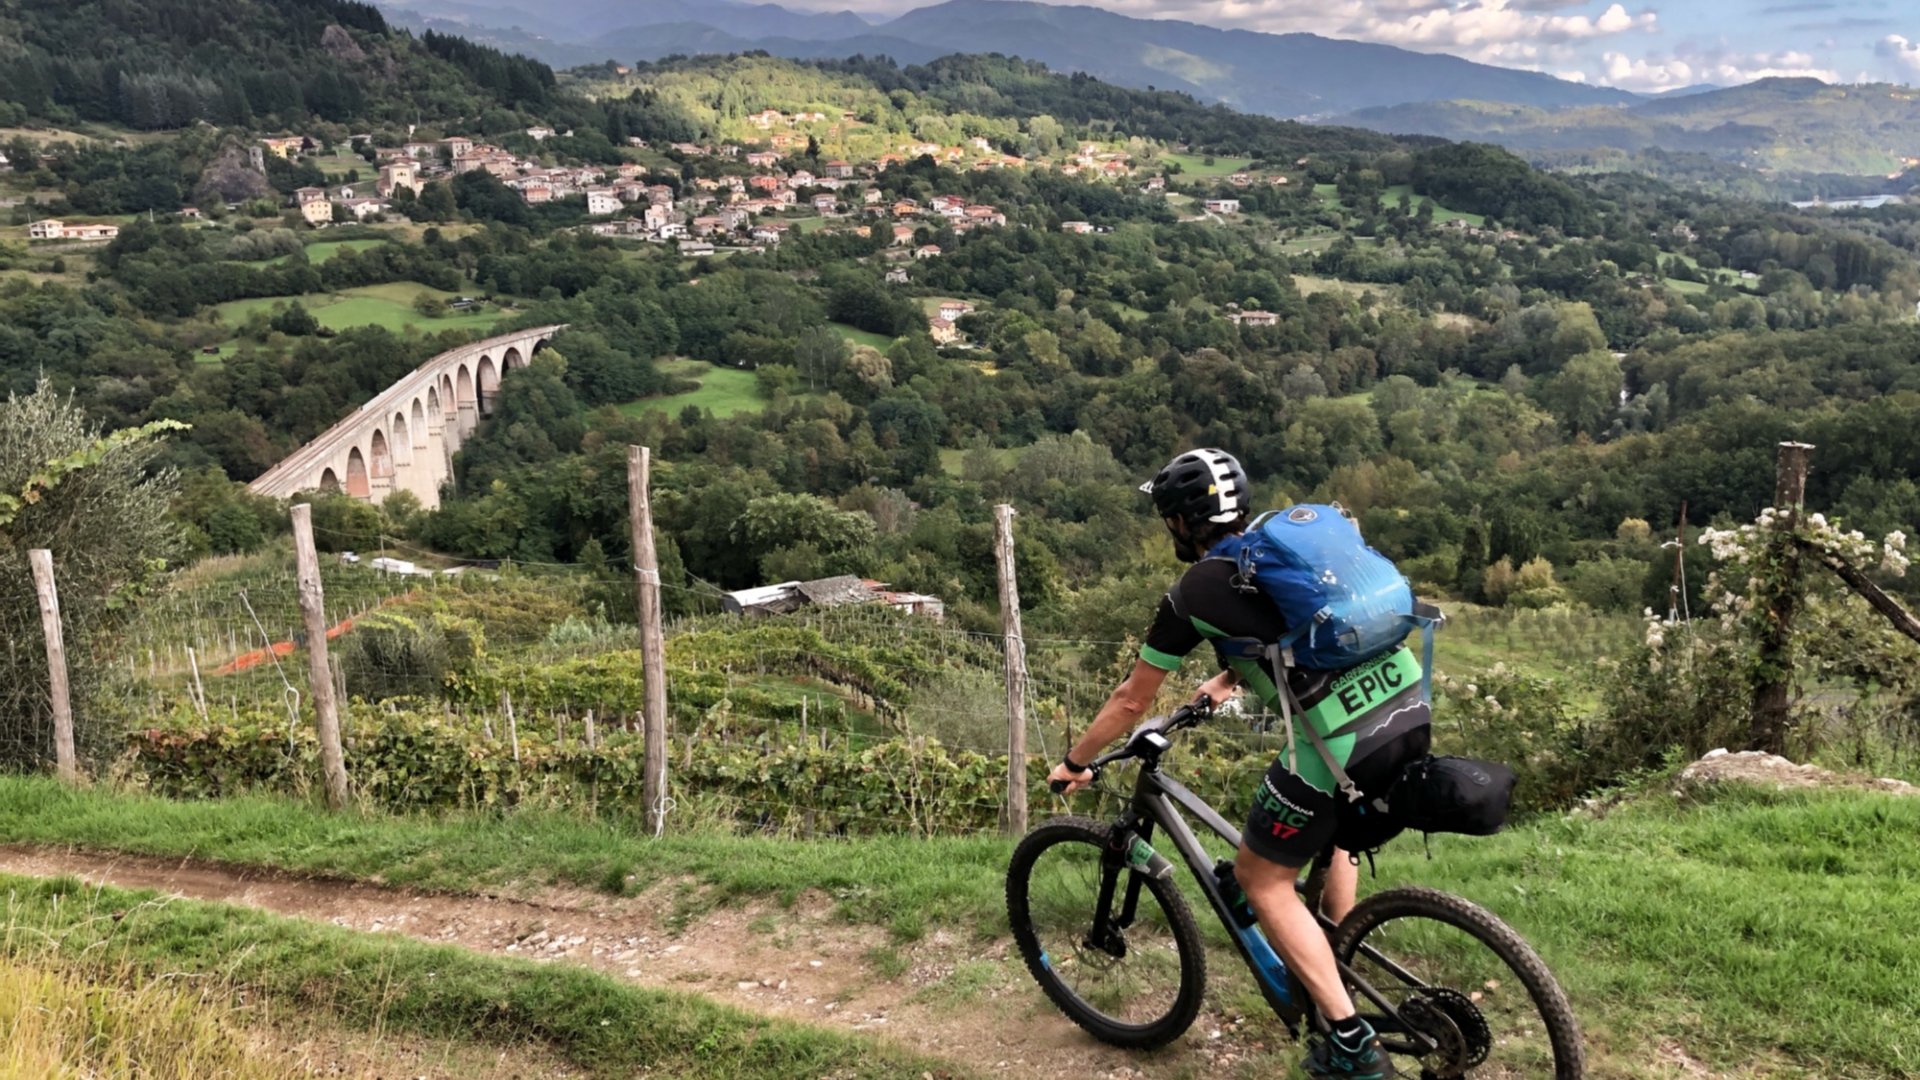 In e-bike through villages, nature and... local food in Tuscany